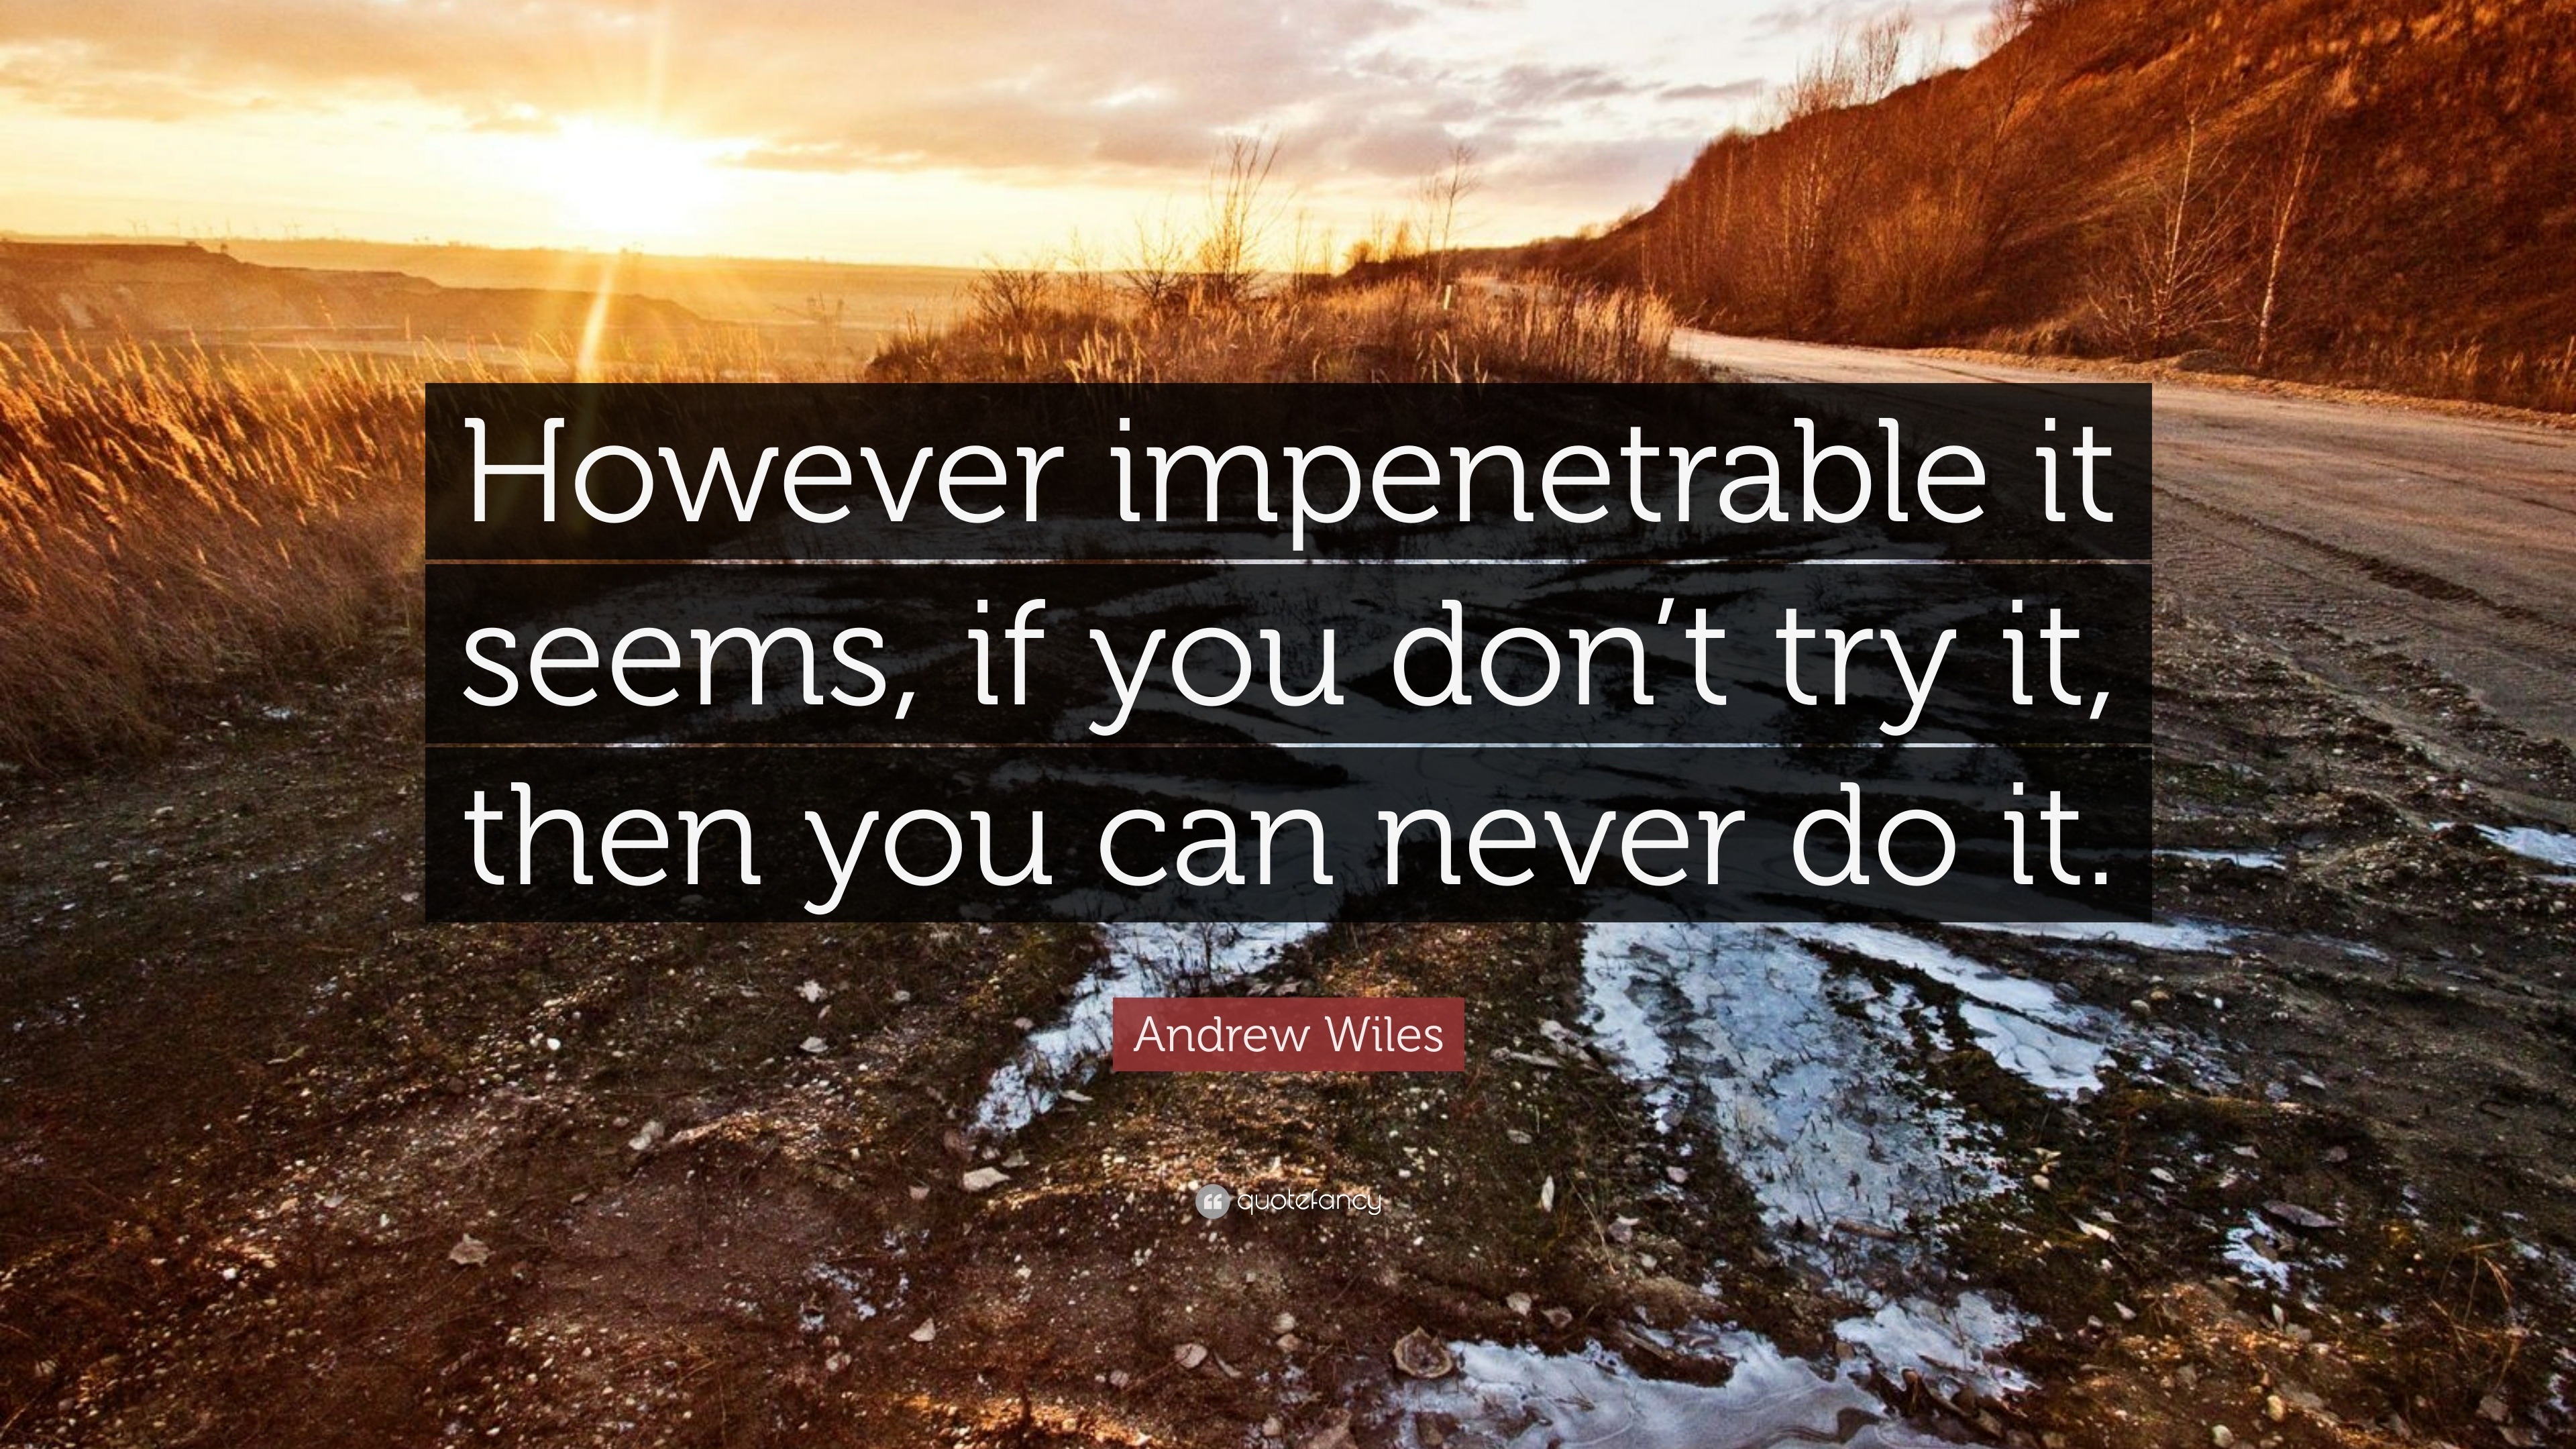 Andrew Wiles Quote: “However impenetrable it seems, if you don’t try it ...